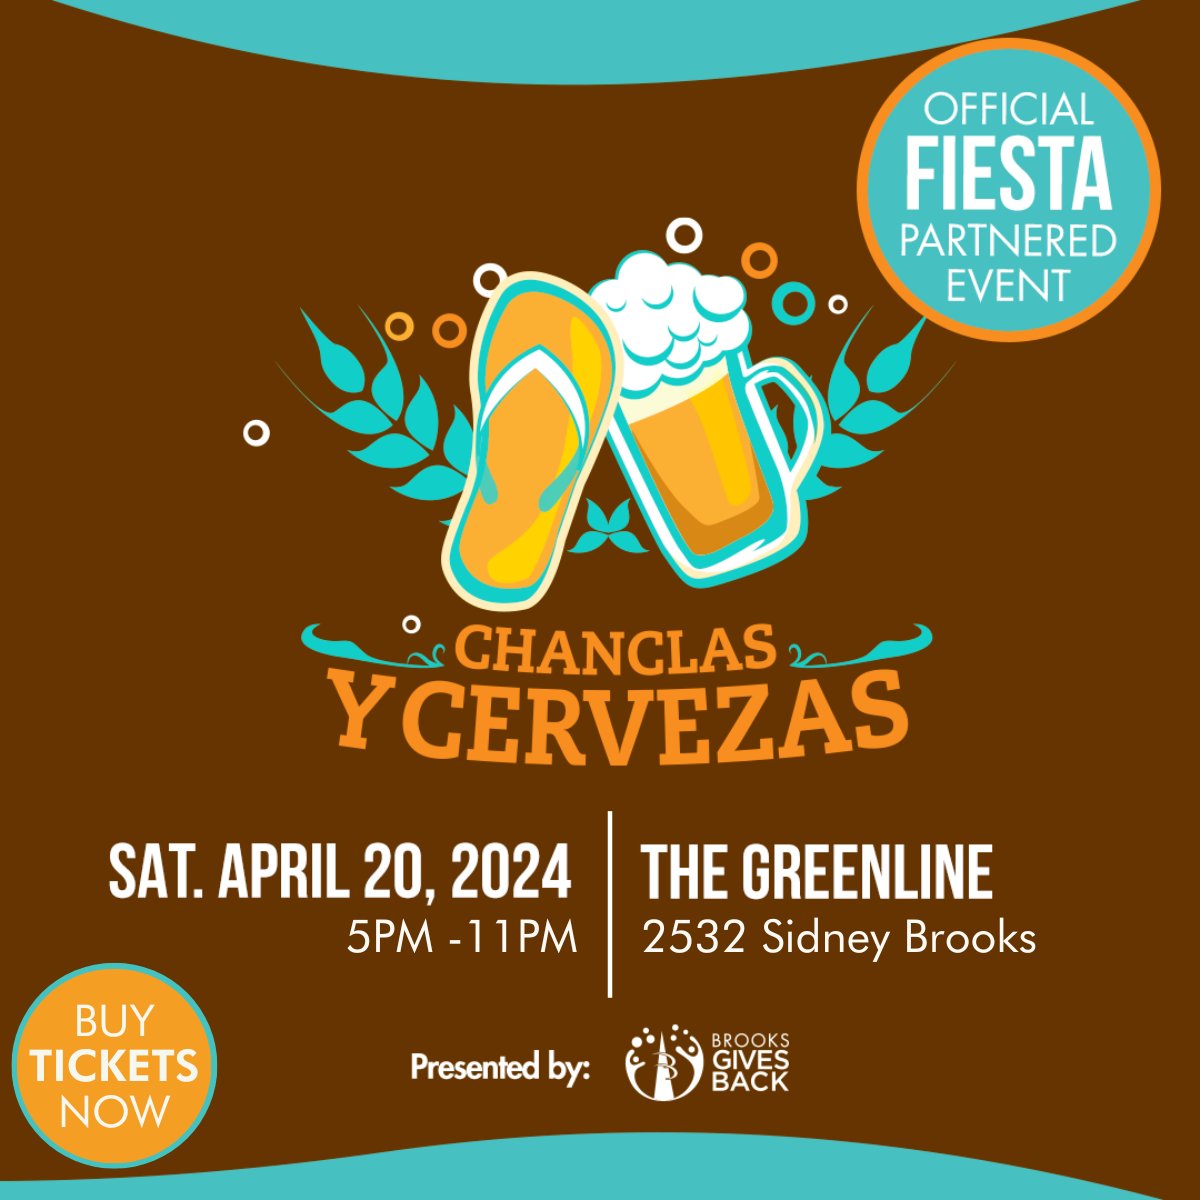 Join Chanclas y Cervezas at The Greenline Park on April 20th for a family-friendly evening of food, games, live music, and cervezas! Test your chancla-throwing skills and enter to win a grand prize pack. Don't miss out! t.dostuffmedia.com/t/c/s/135460